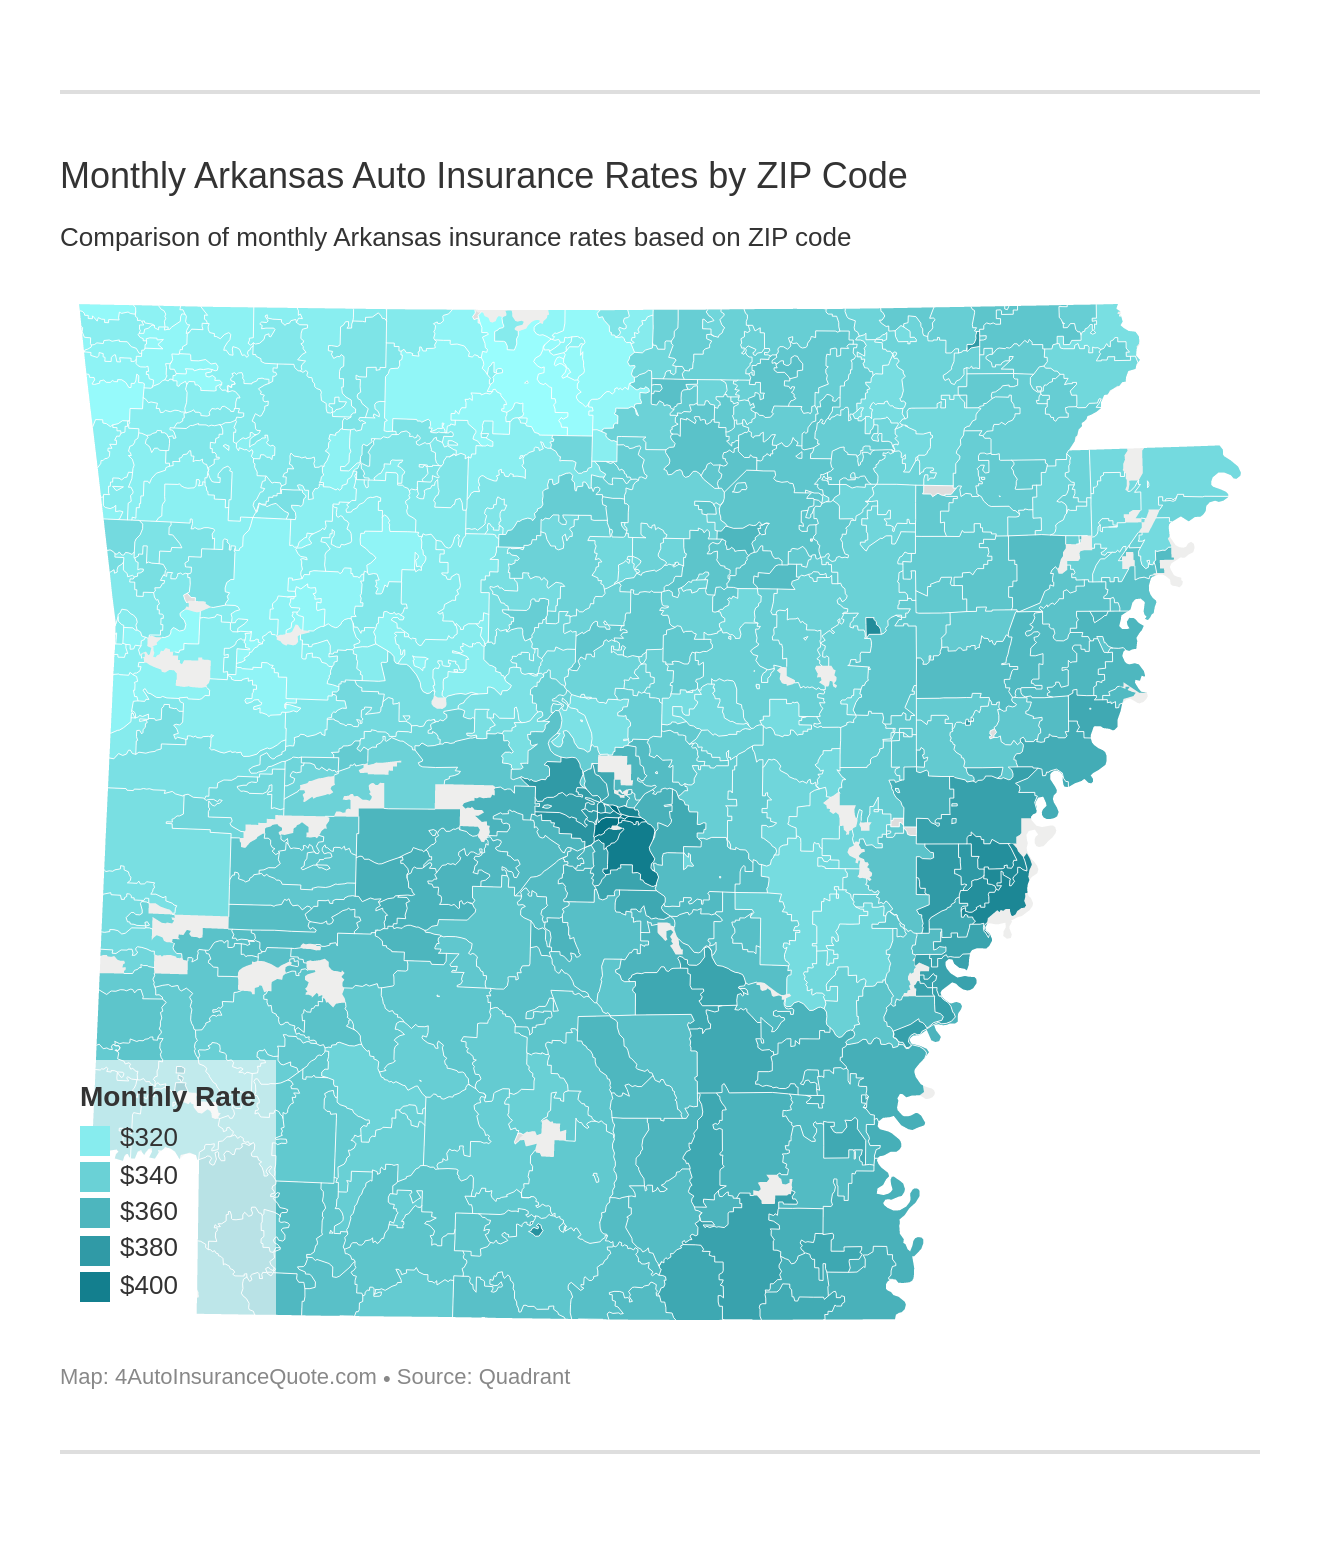 Monthly Arkansas Auto Insurance Rates by ZIP Code